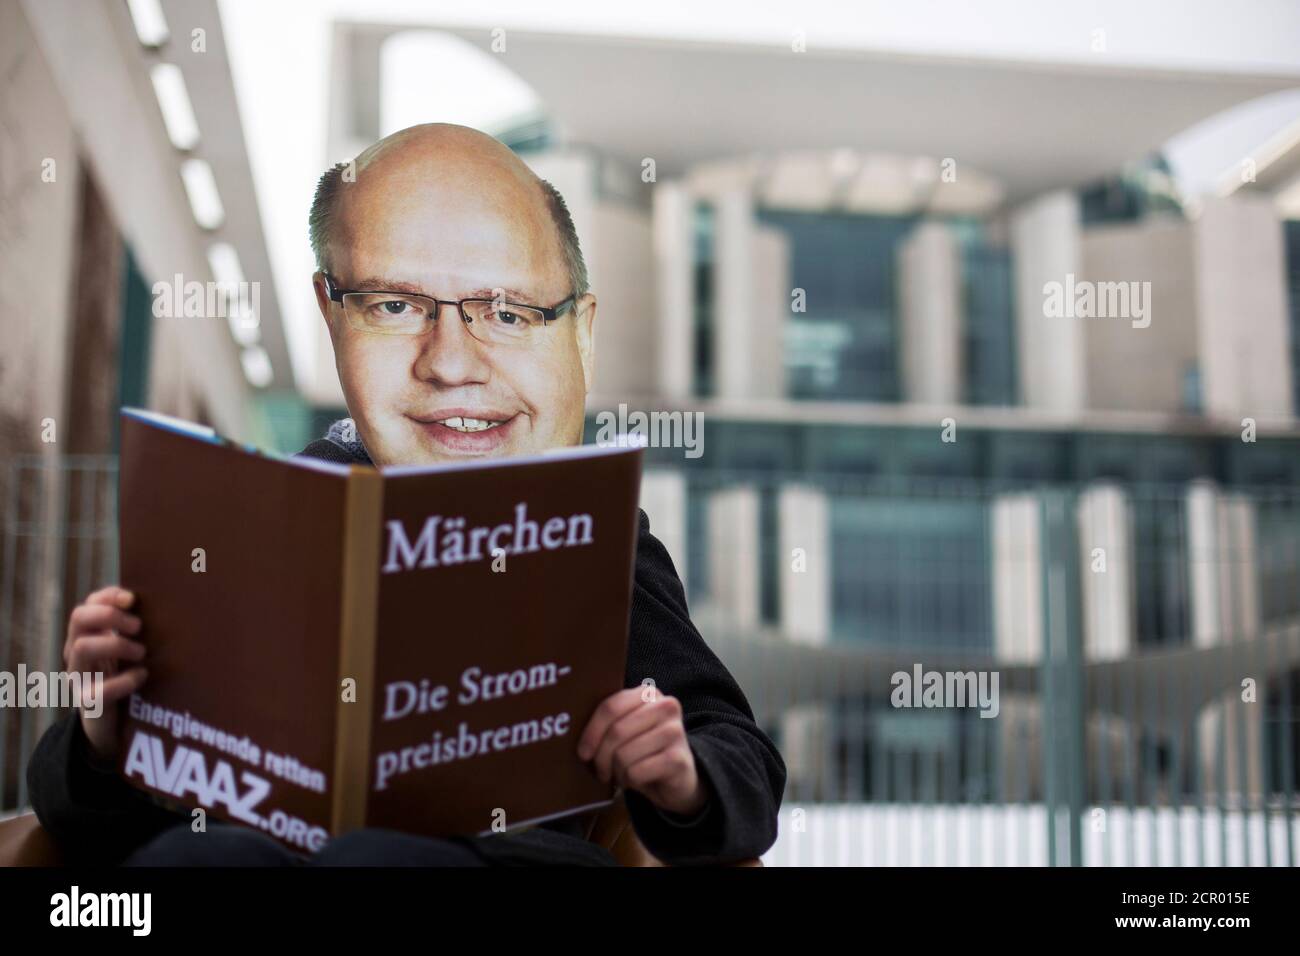 A environmental activist wearing a mask of Environment Minister Peter Altmaier pretends to read from a mock fairy tale book during protest against the government's handling of the energy transition in front of the Chancellery in Berlin, March 21, 2013.  German Chancellor Angela Merkel has invited Germany's state ministers to discuss the progress of Germany's transition to renewable energy. The writing on the book reads: 'Fairy tales. The Energy Prize Curtailment'.   REUTERS/Thomas Peter (GERMANY  - Tags: CIVIL UNREST POLITICS ENERGY) Stock Photo